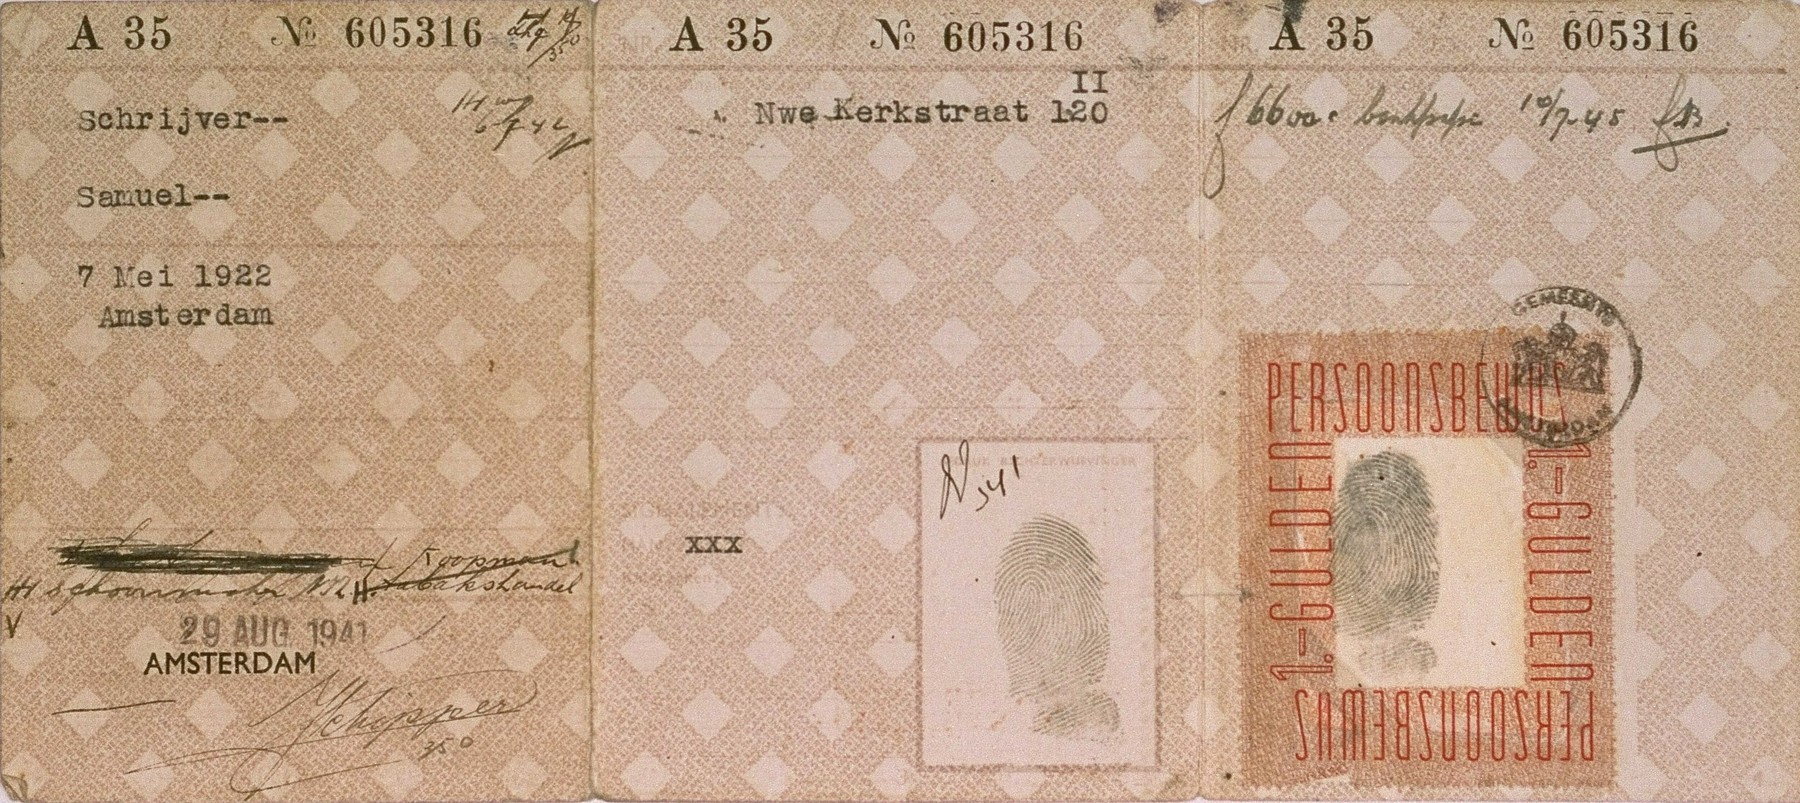 An identification document issued to Samuel Schrijver while he was working as an orderly at the Jewish hospital in Amsterdam.